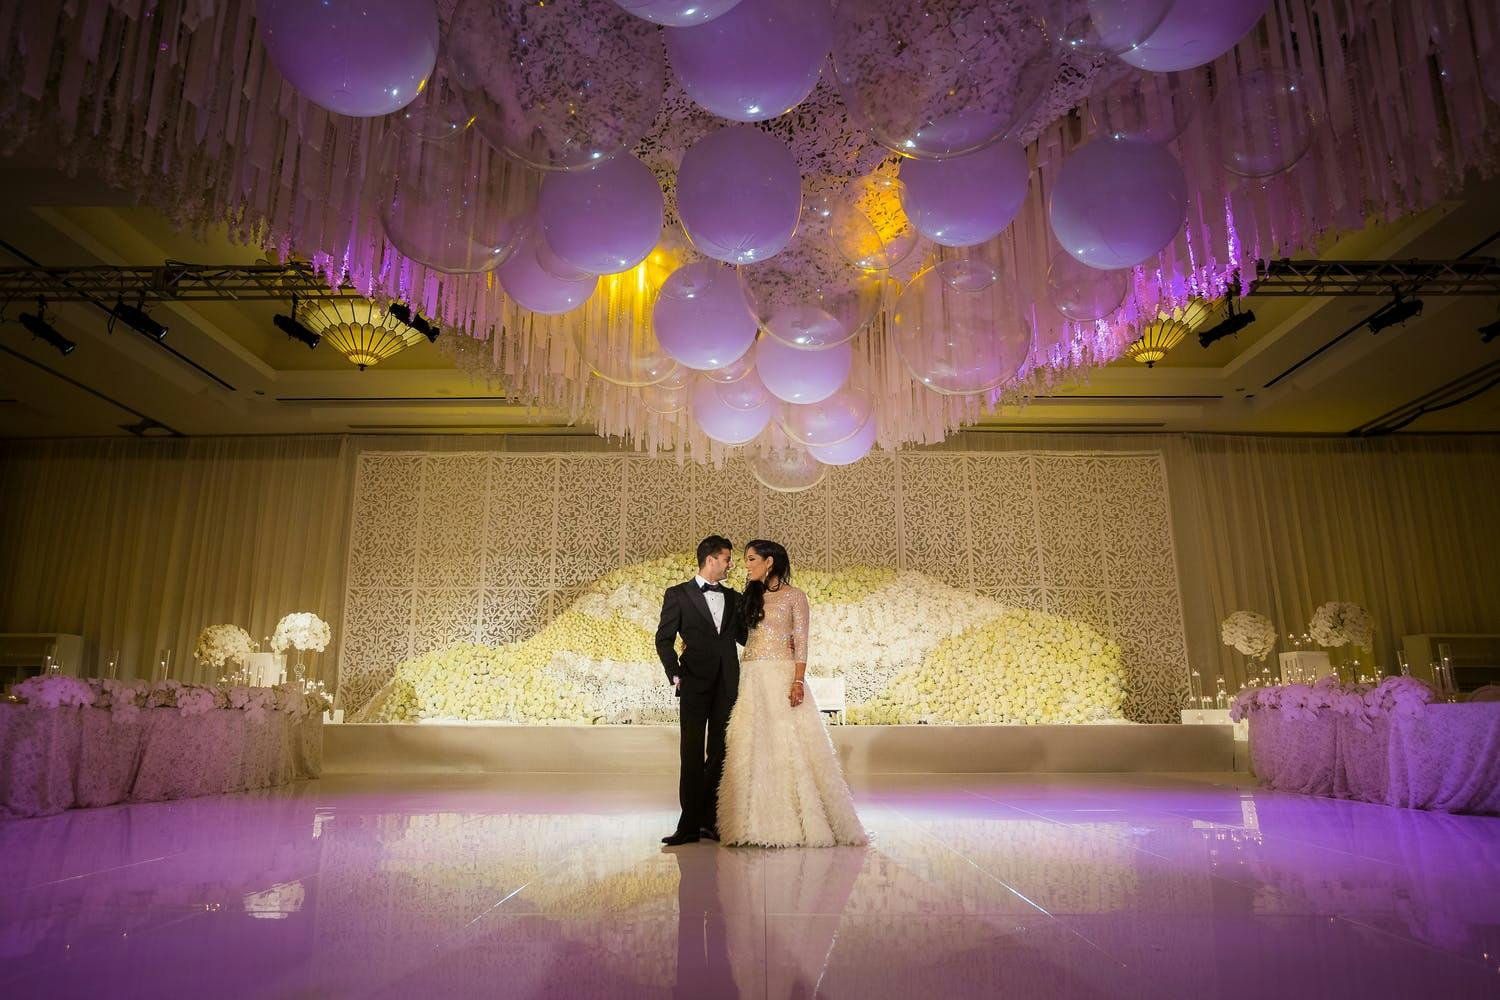 Bride and Groom Stand on Purple-Lit Dance Floor and Under Wedding Ceiling Decorations With Shimmering Balloons | PartySlate